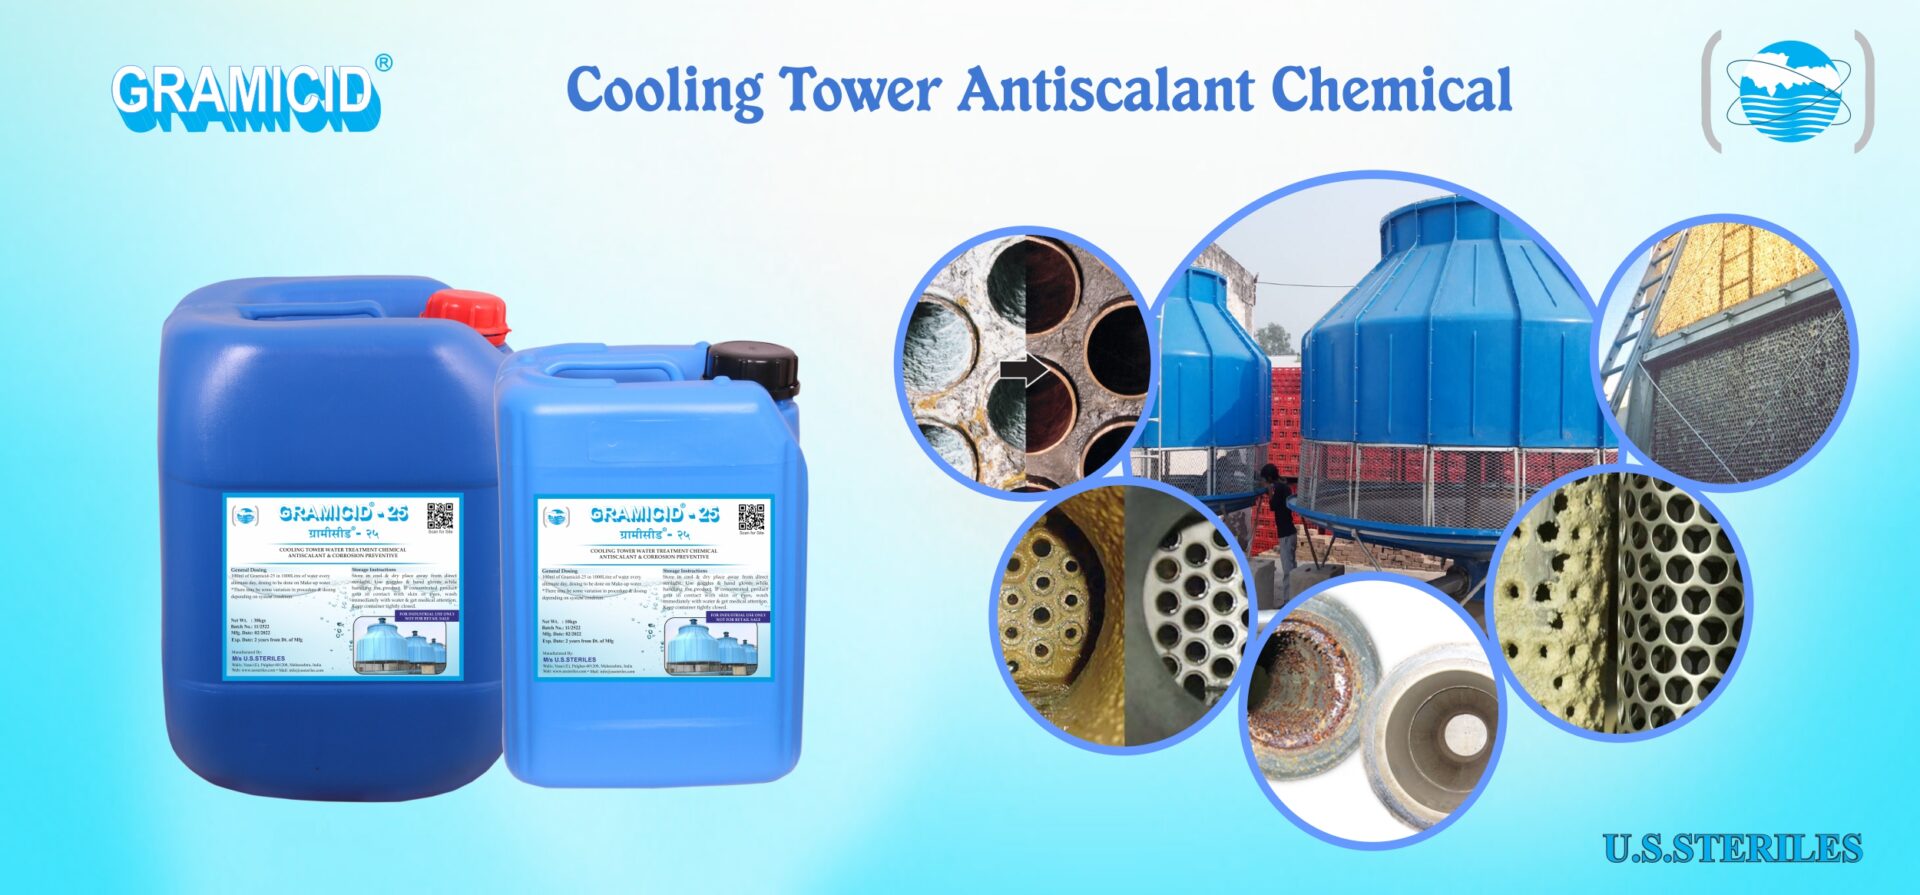 Cooling Tower Antiscalant Chemicals Manufacturers